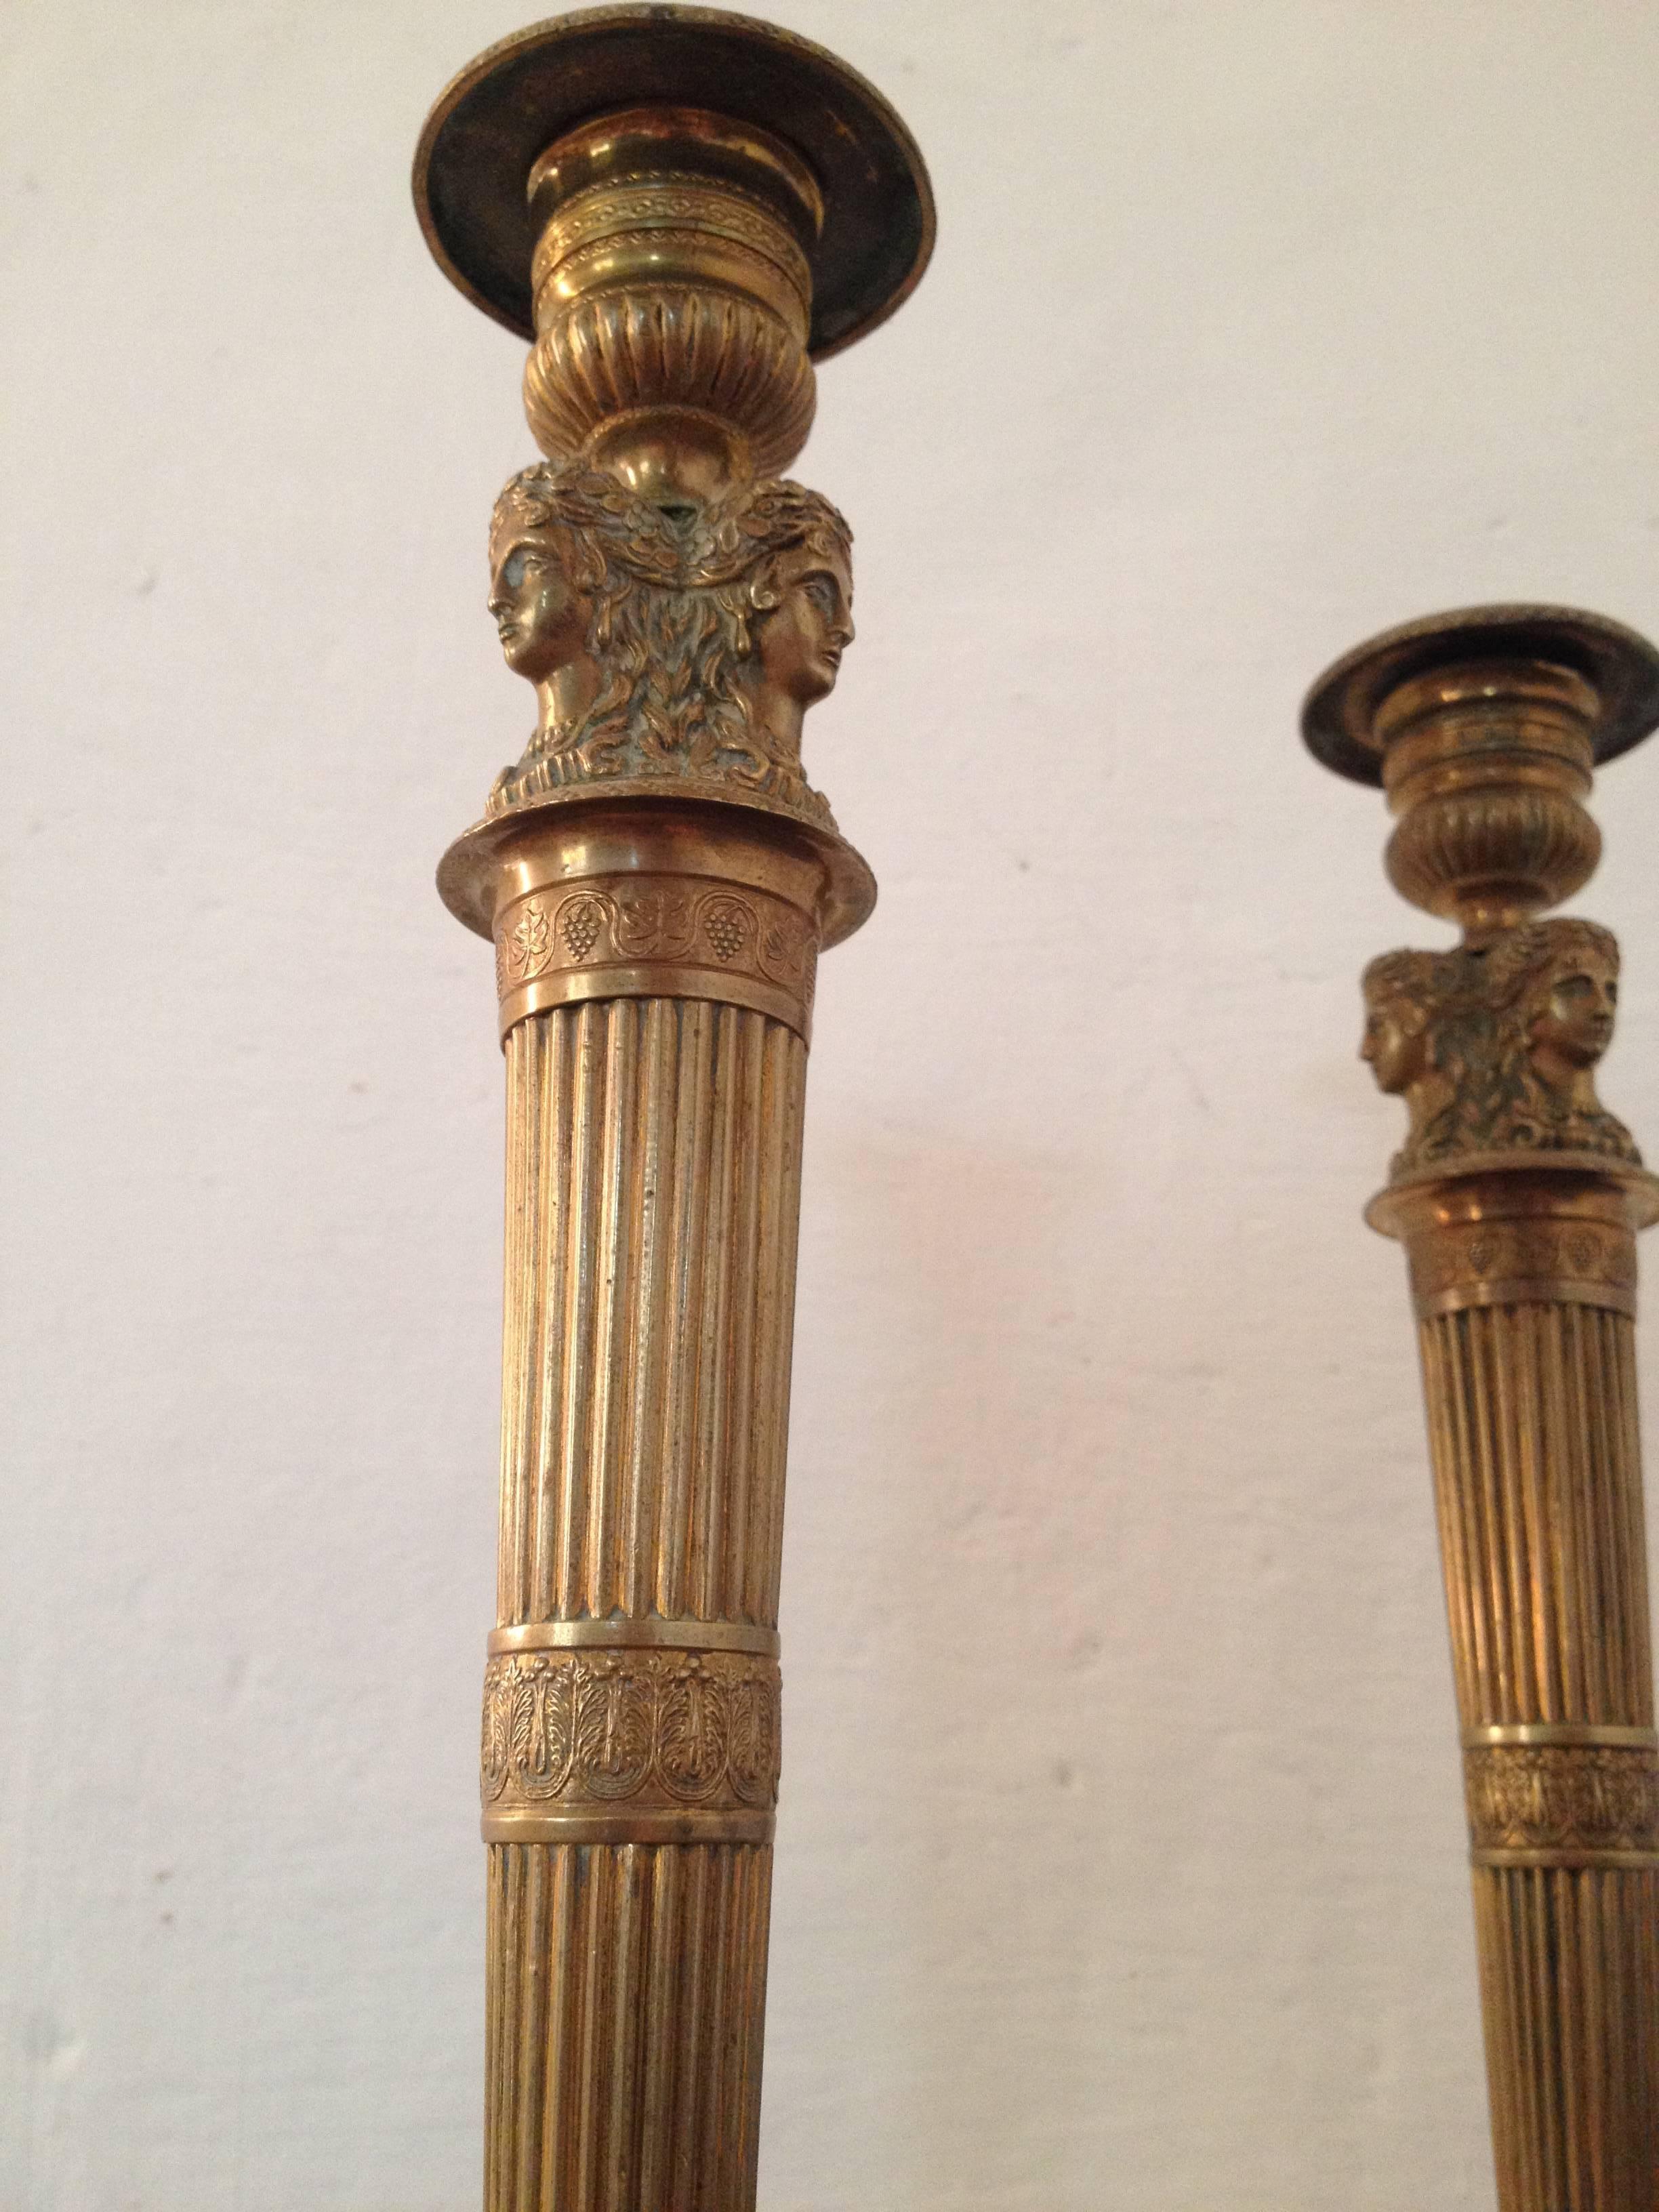 Pair of candlesticks in gilt and sculpted bronze, adorned with three cariatids set above a tapered shaft.
The sockets of the candlesticks are intricately sculpted with beading and stylized foliage. Each candlestick is set on a circular base with a